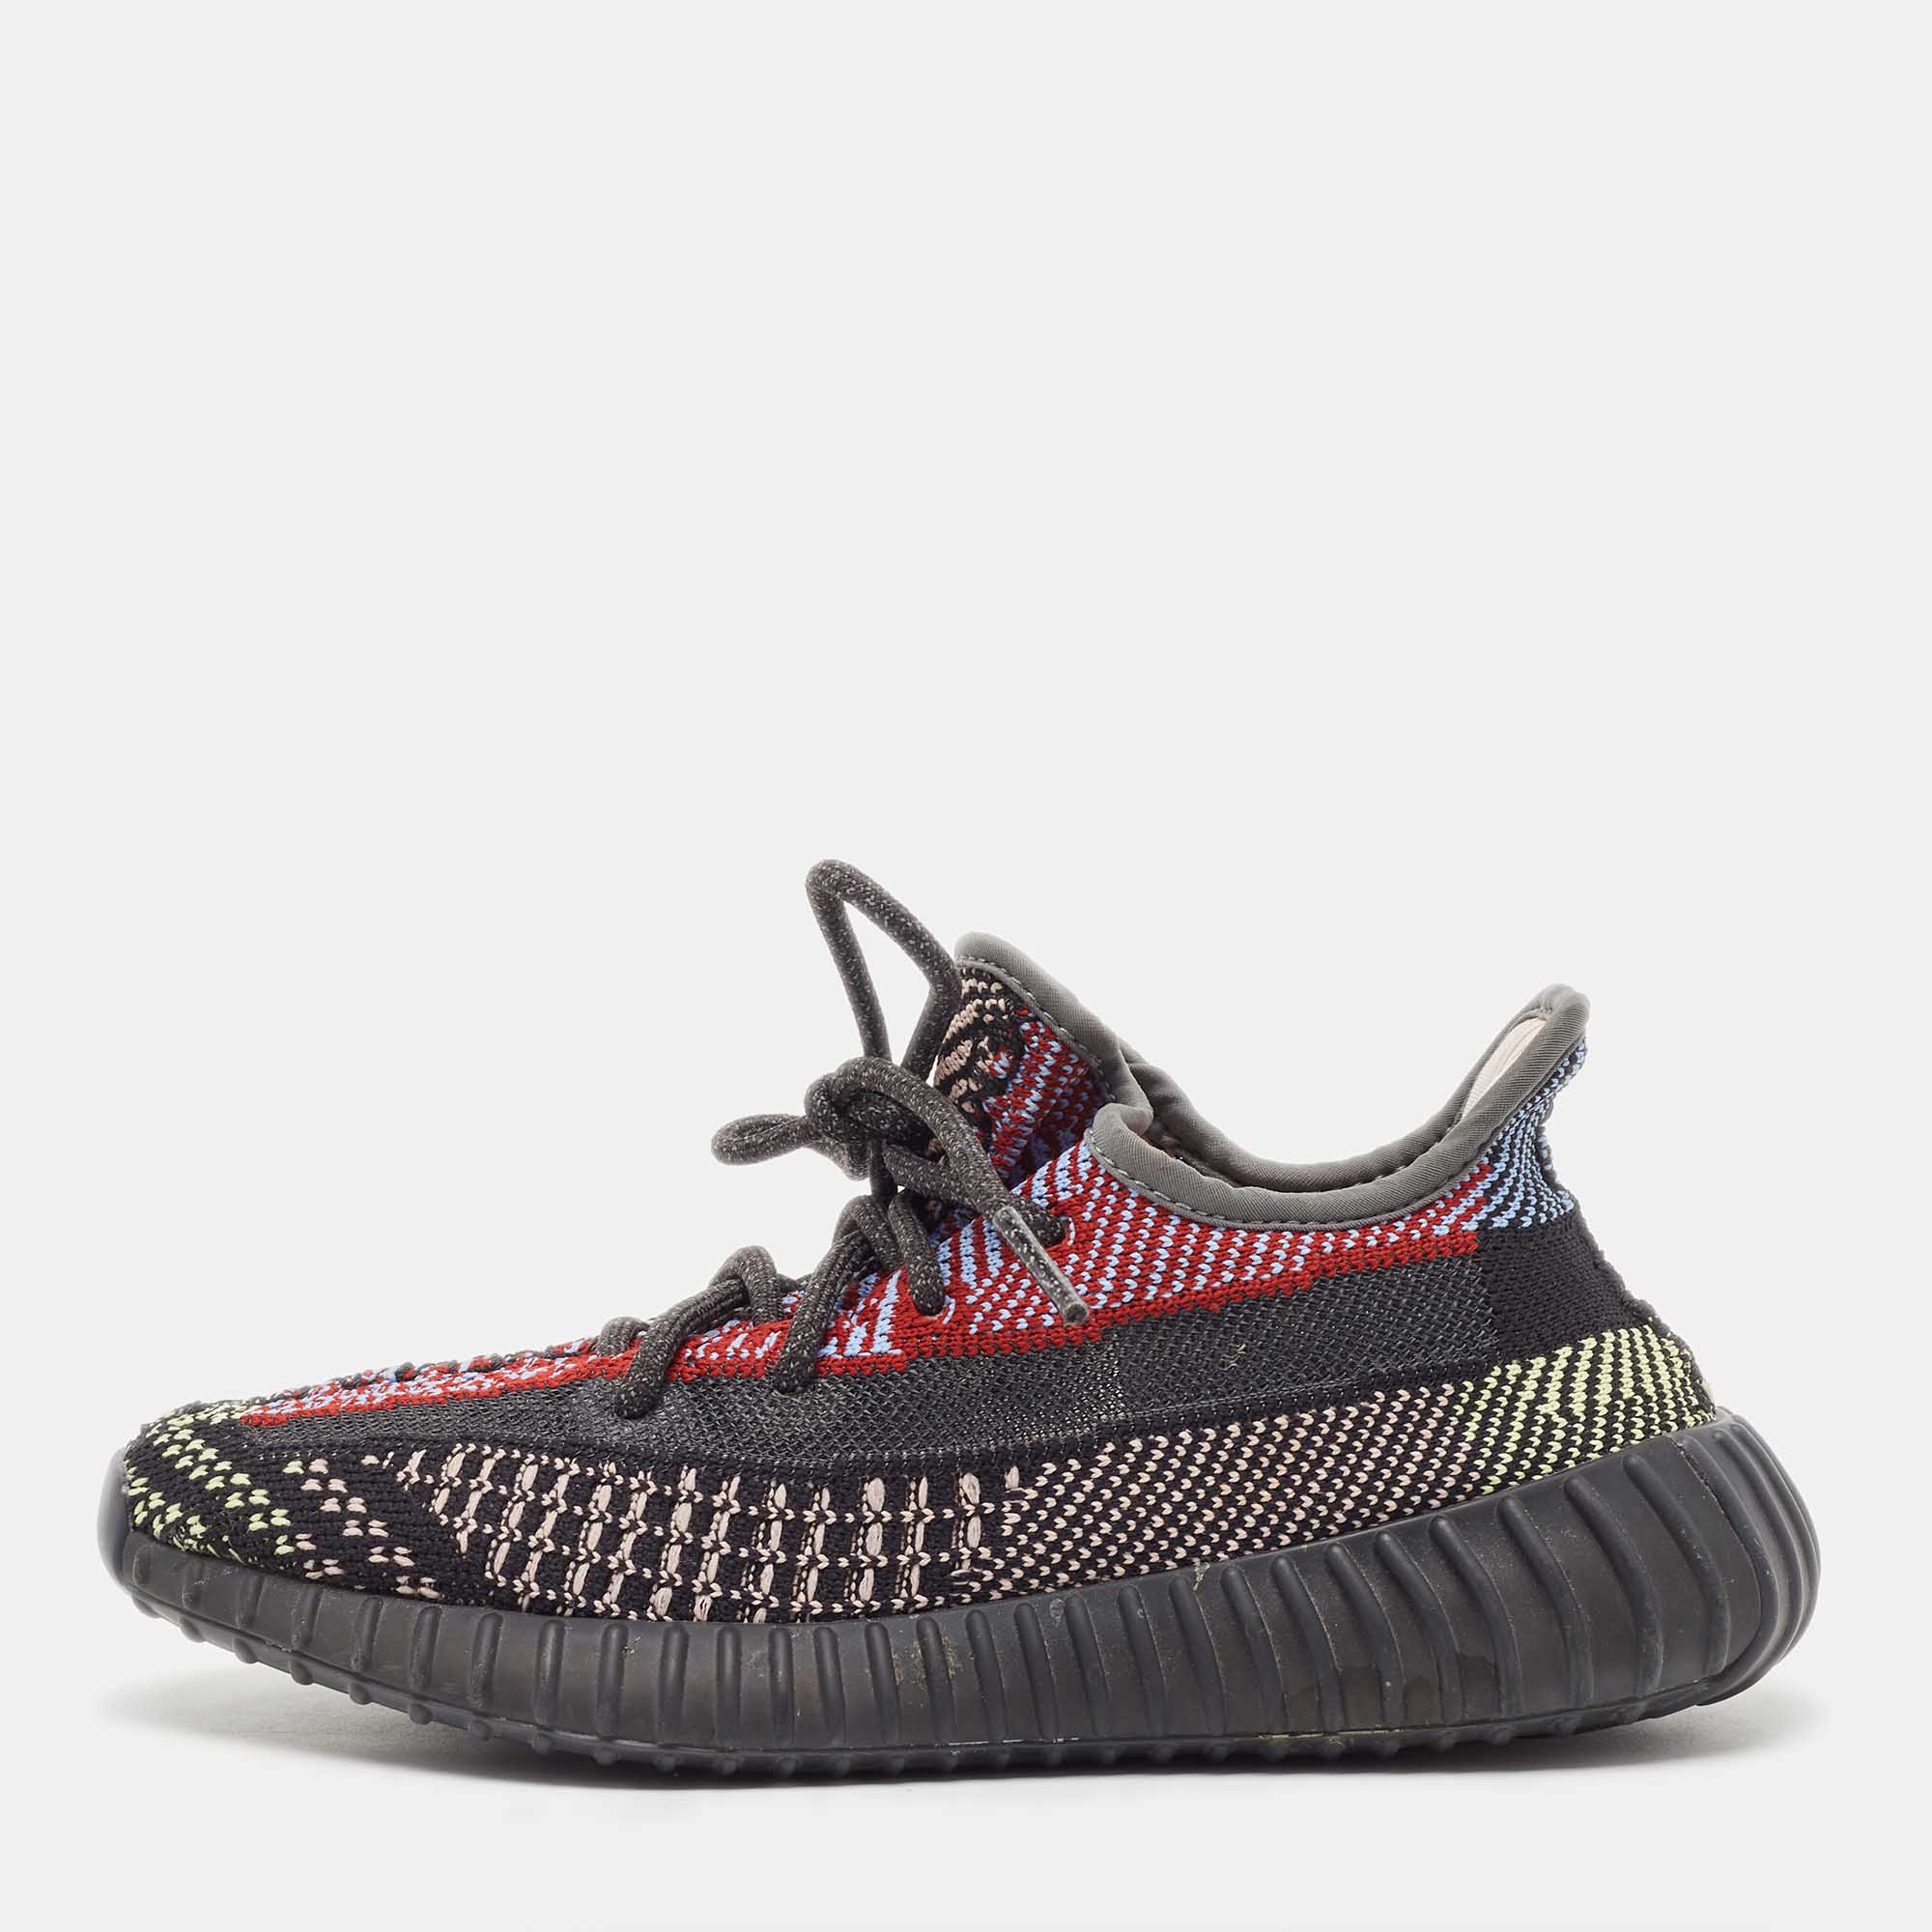 Pre-owned Yeezy X Adidas Multicolor Knit Fabric Boost 350 V2 Yecheil (non-reflective) Trainers Size 38 In Black